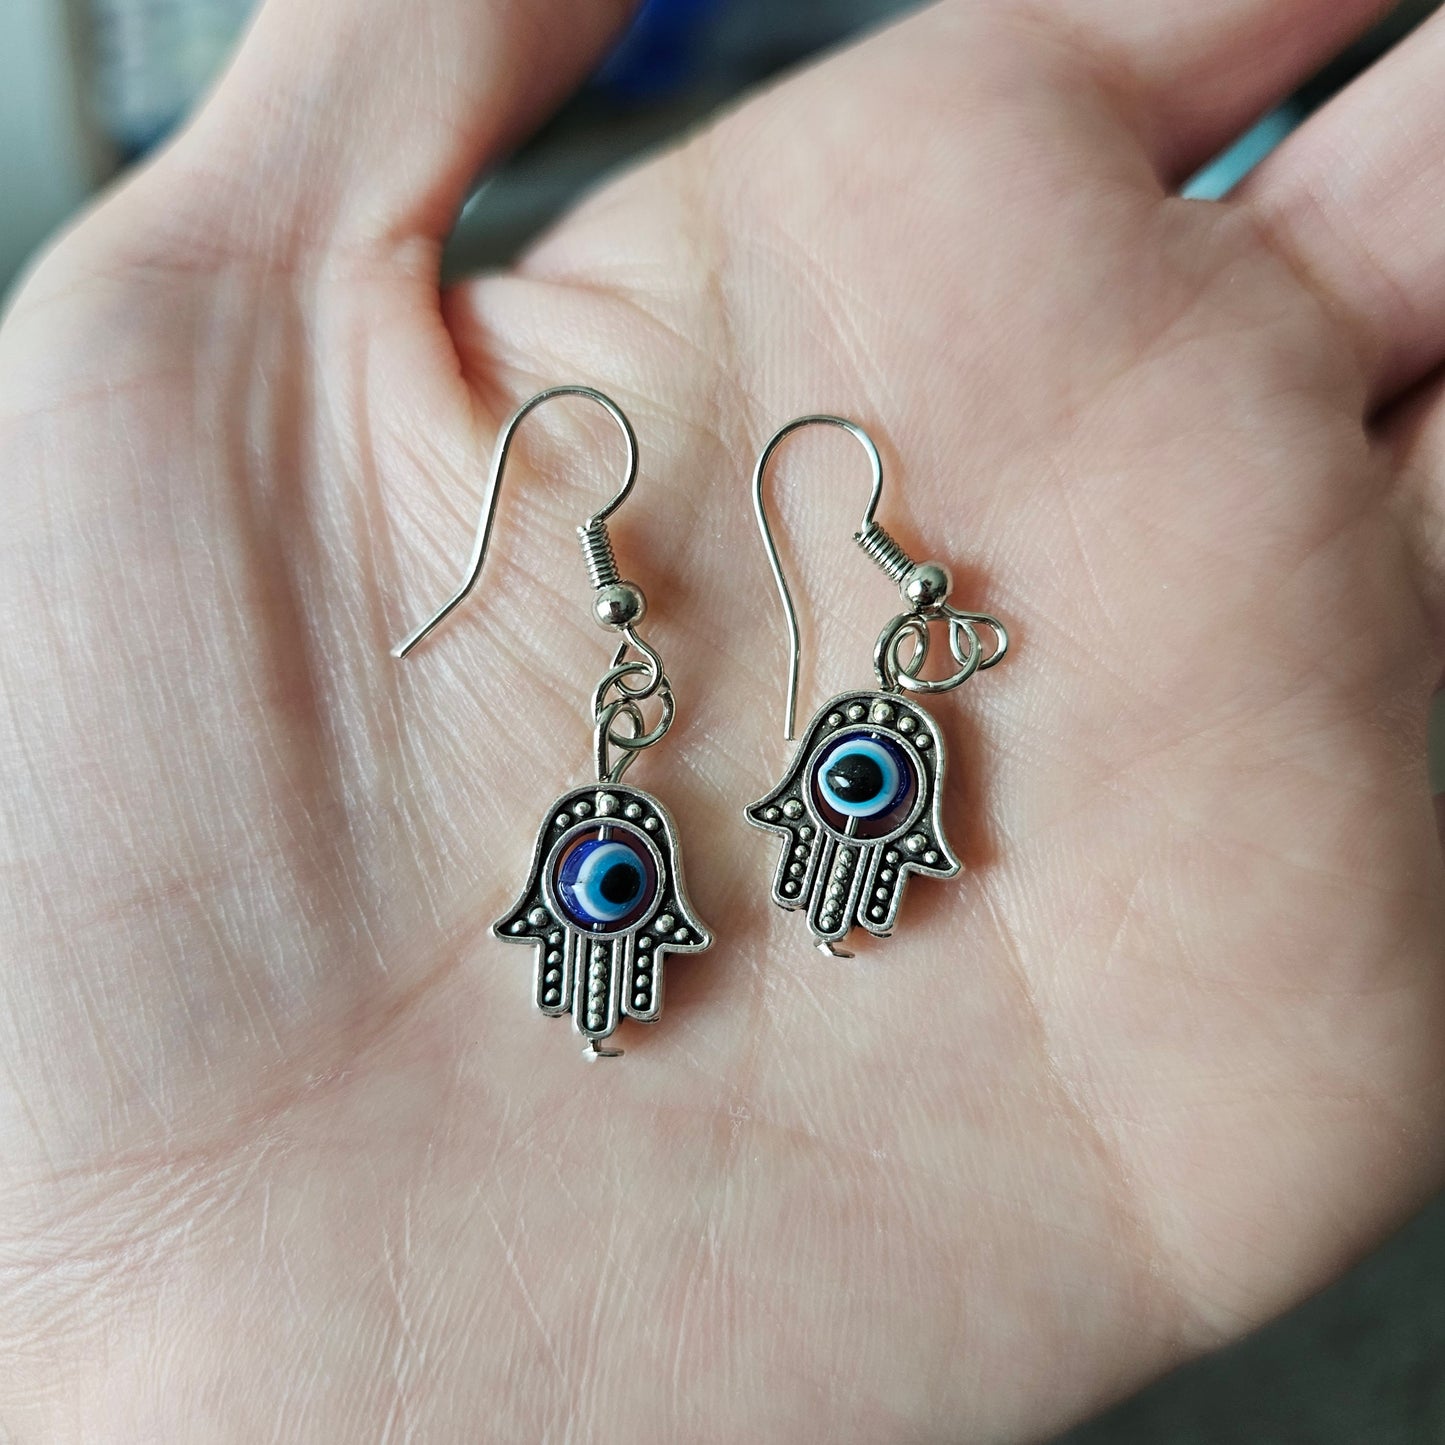 Hamsa Evil Eye Drop Earrings - Hand of Fatima - minimalistic amulet, talisman - Protection against evil forces - Jewelry & Gifts